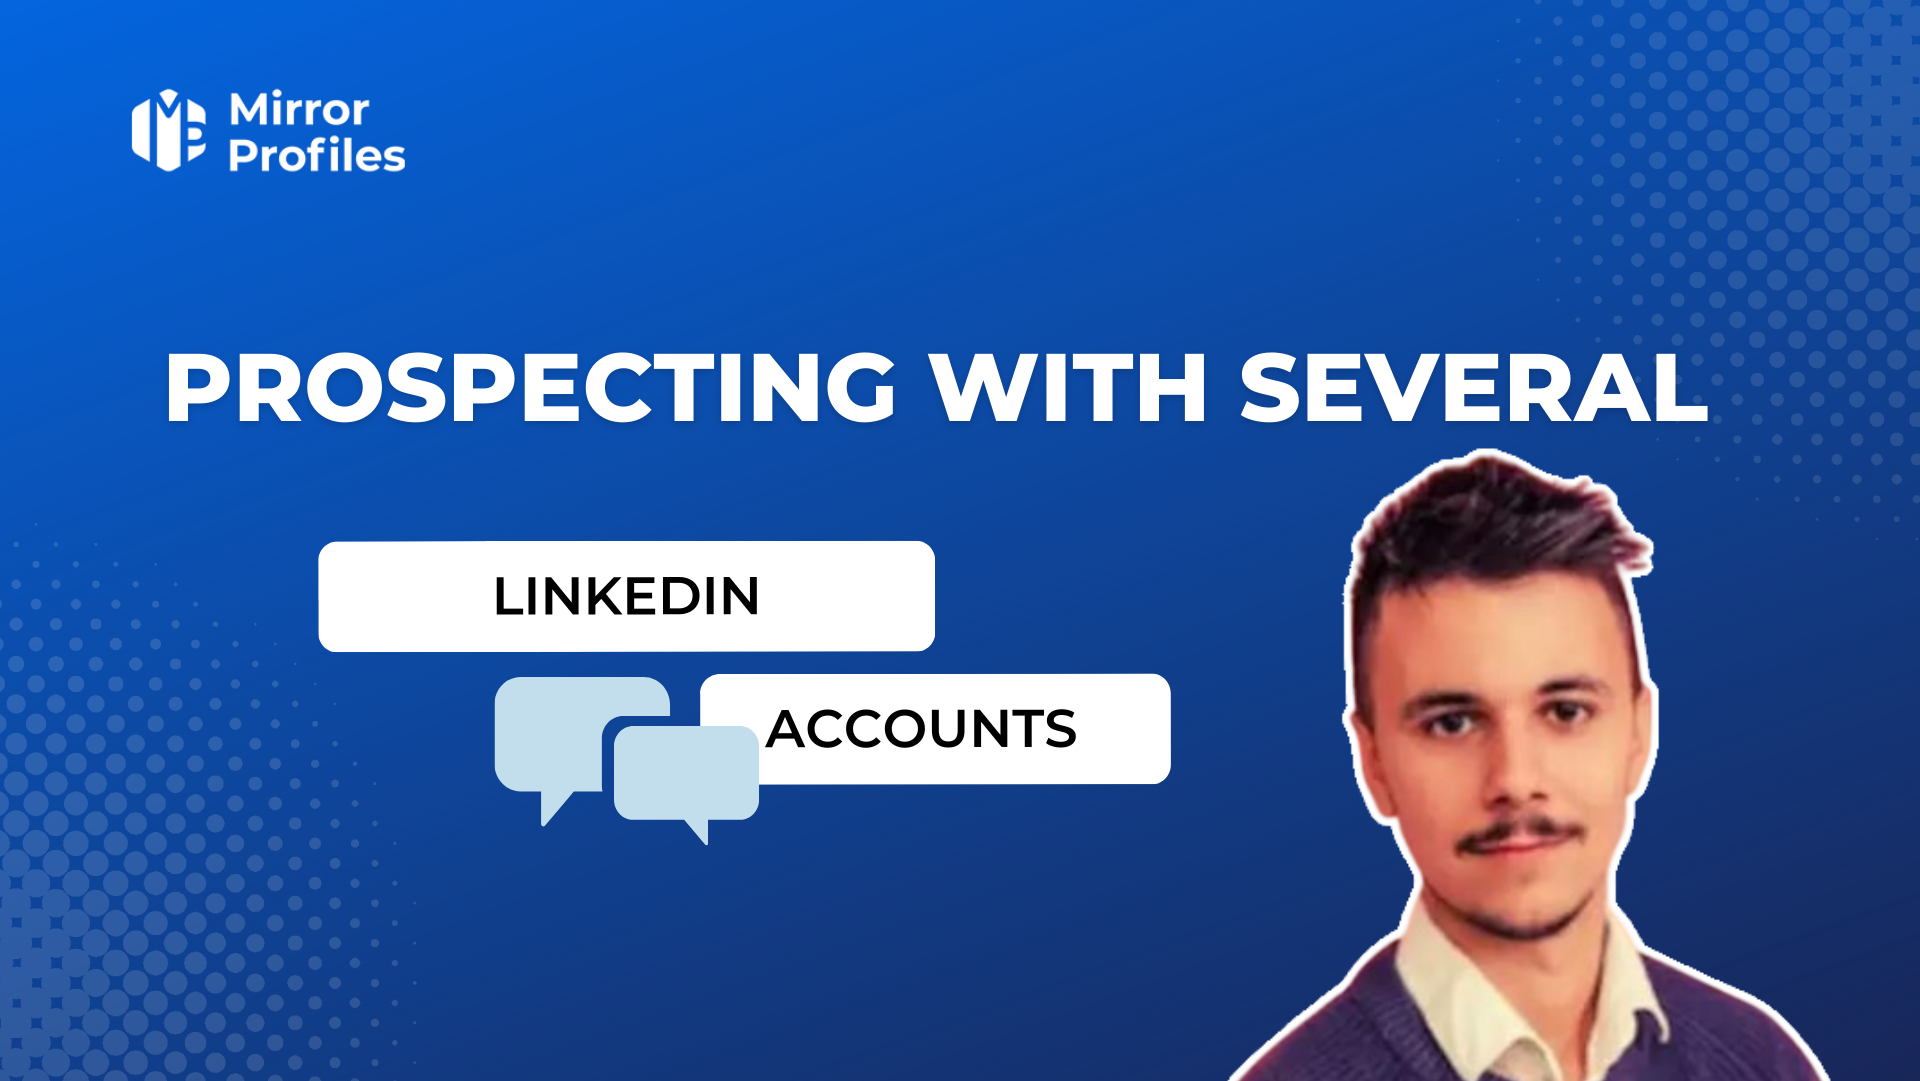 Prospecting with several Linkedin accounts